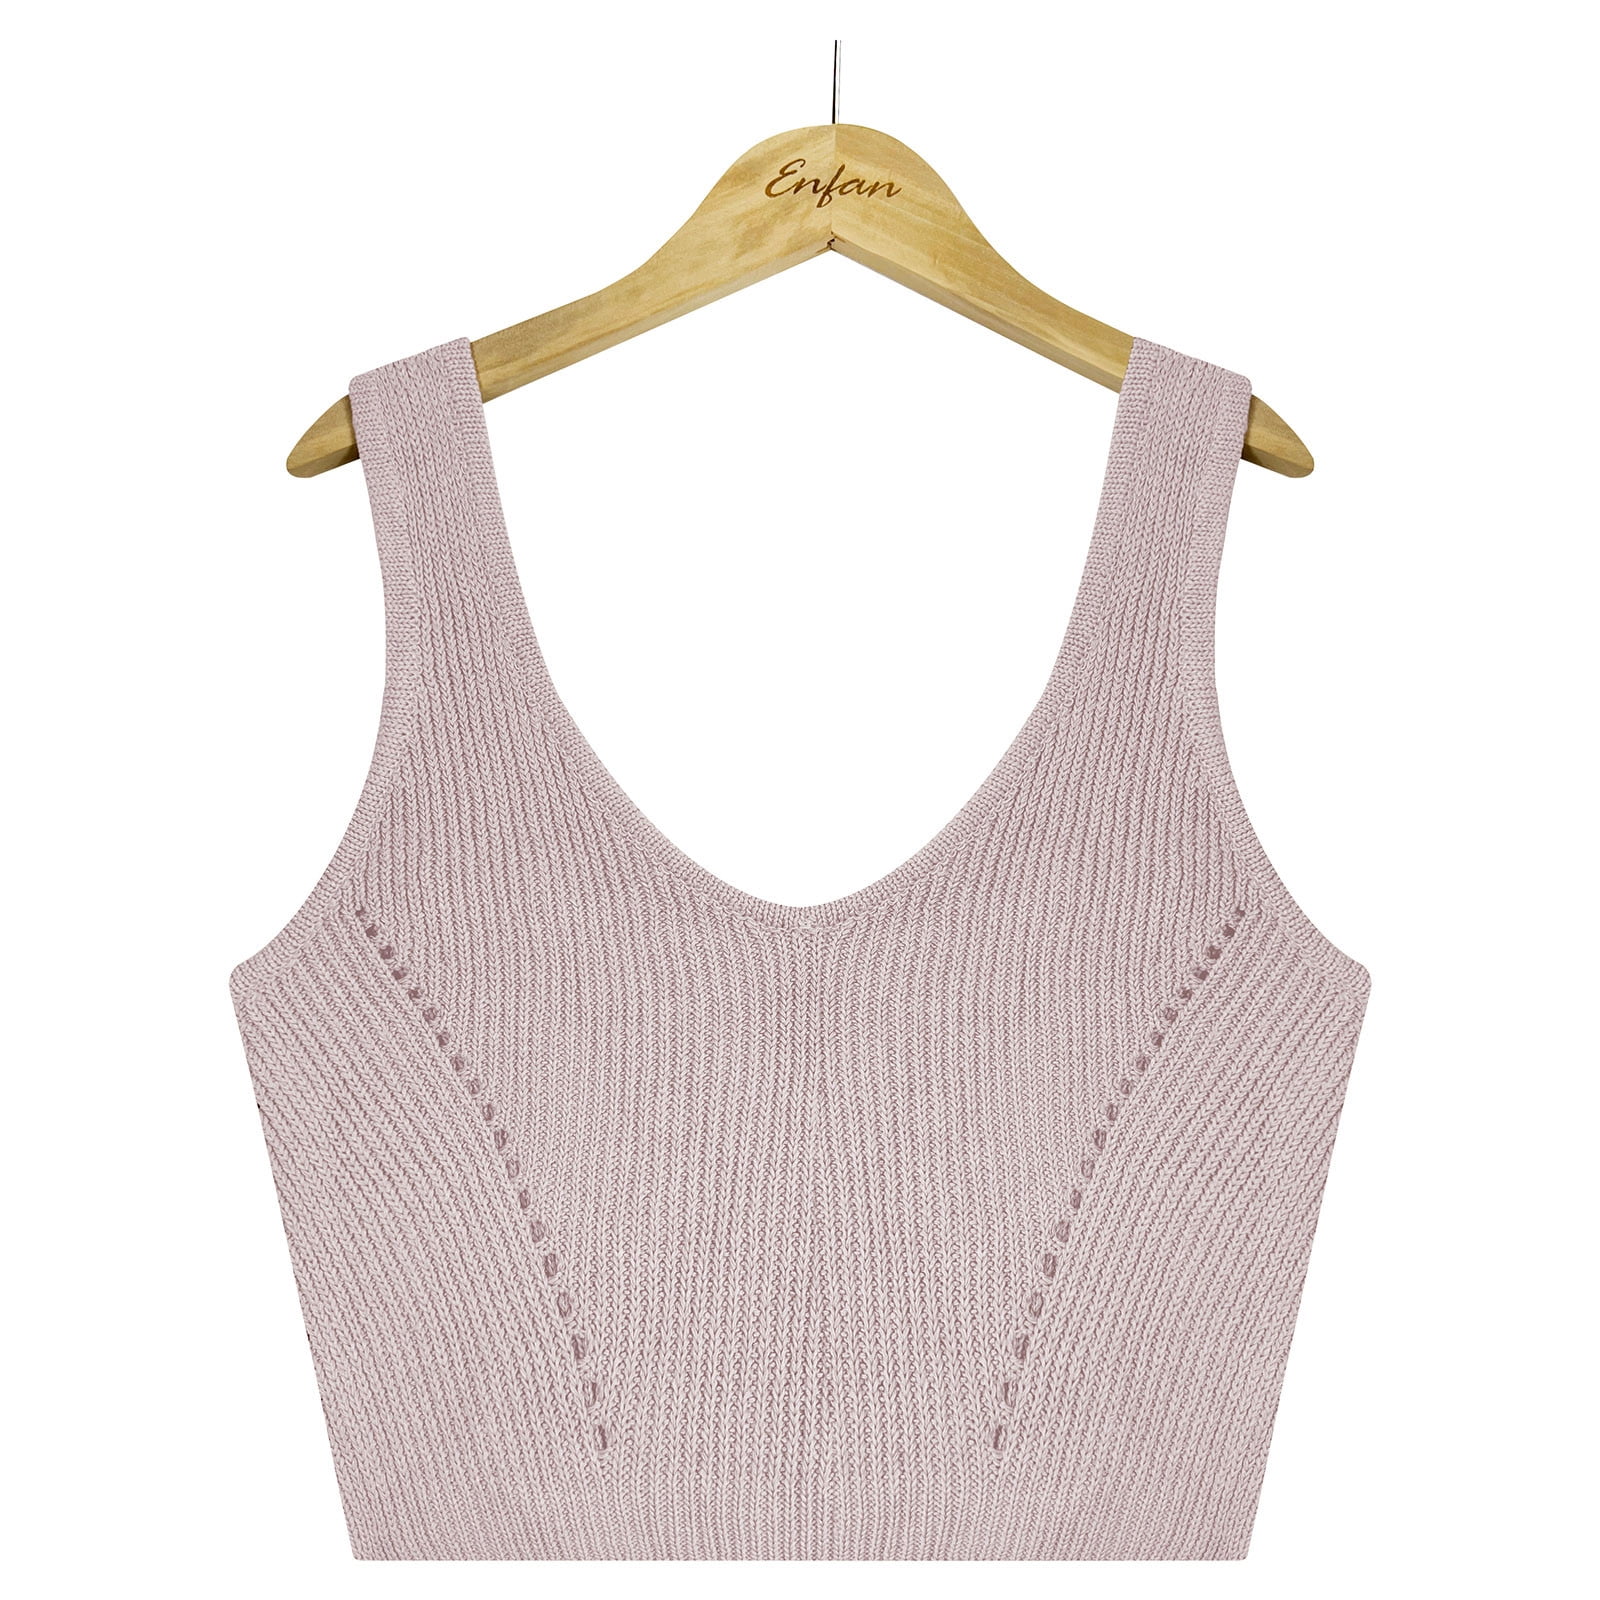 Cute Crop Tops for Women,Pink Bow Camisole Knit V Neck Tank Tops